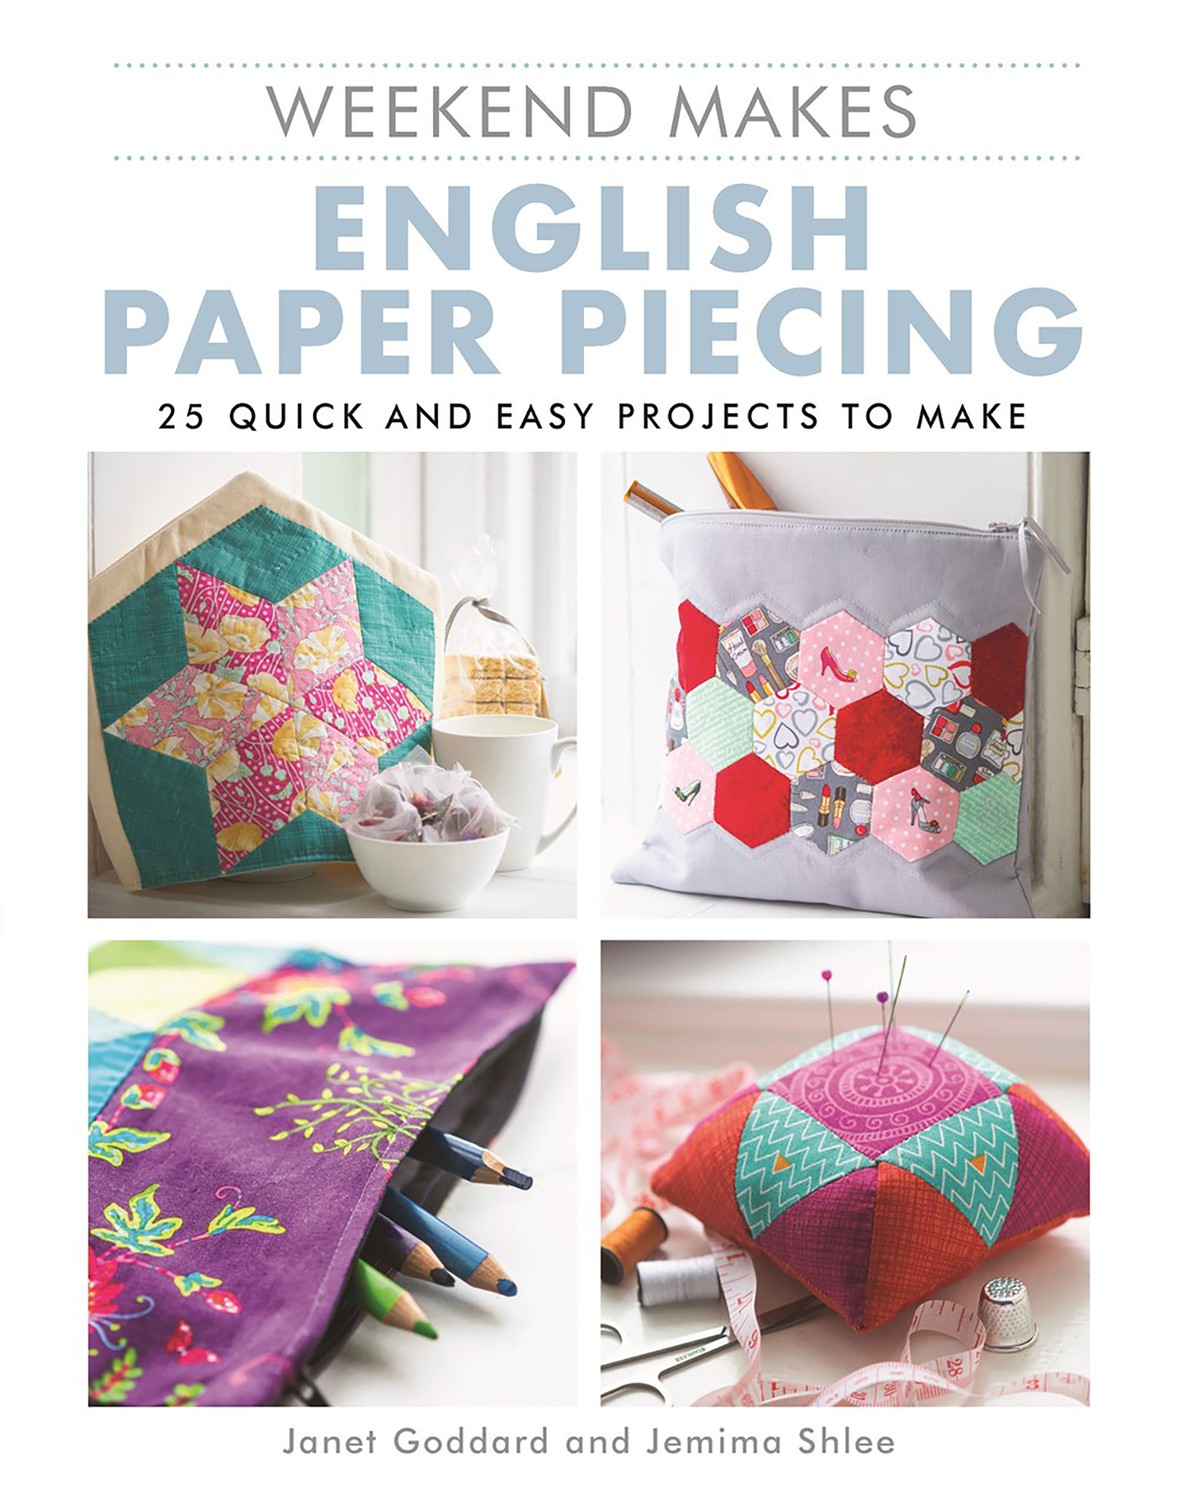 Learn English Paper Piecing - Bonjour Quilts